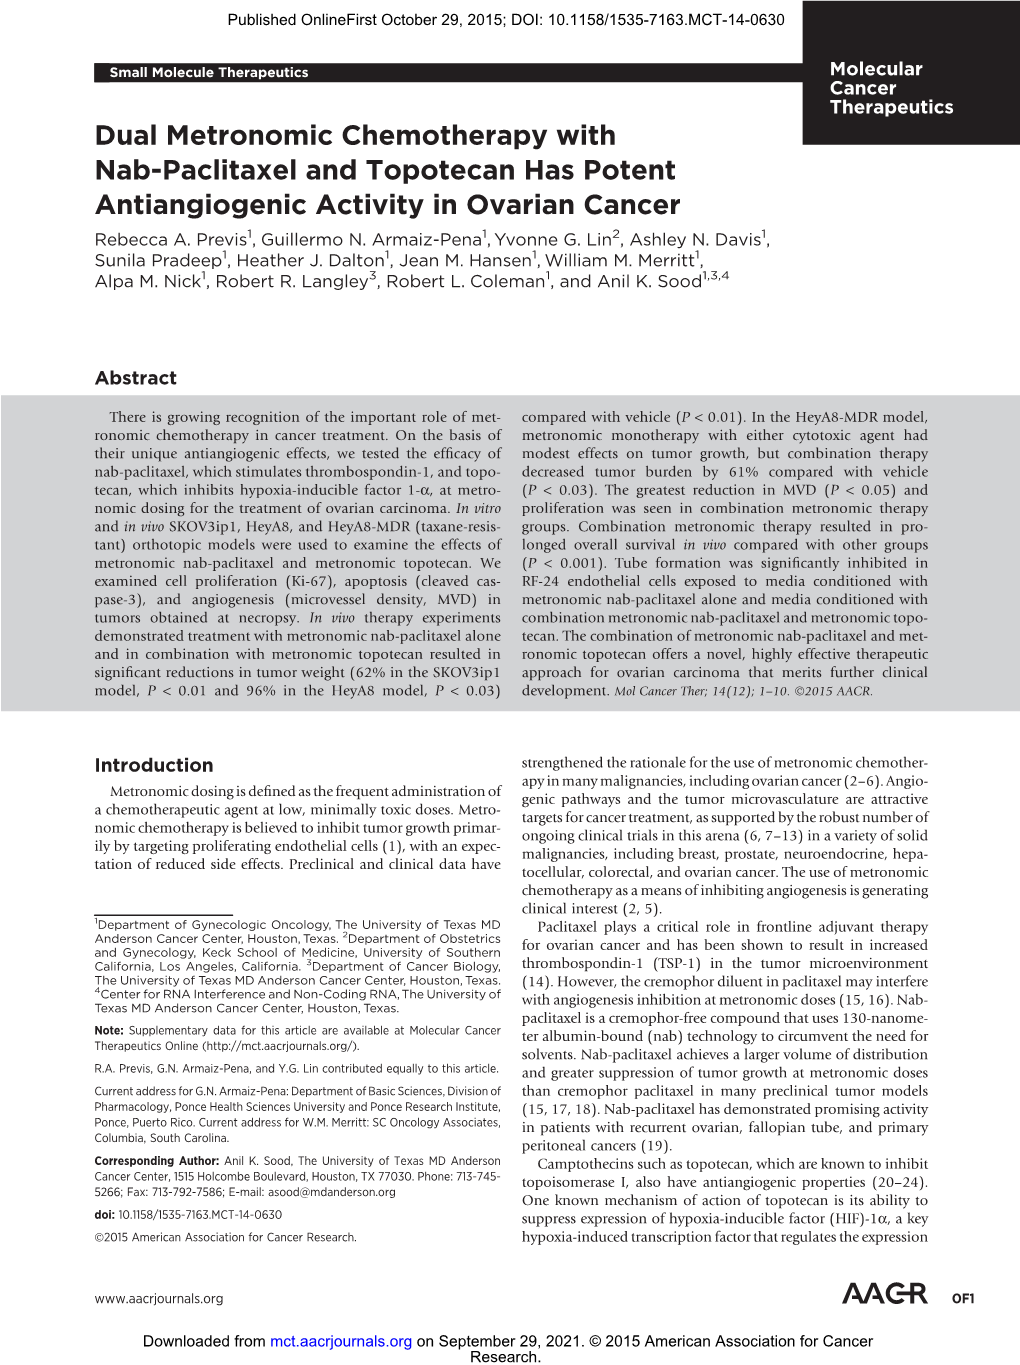 Dual Metronomic Chemotherapy with Nab-Paclitaxel and Topotecan Has Potent Antiangiogenic Activity in Ovarian Cancer Rebecca A